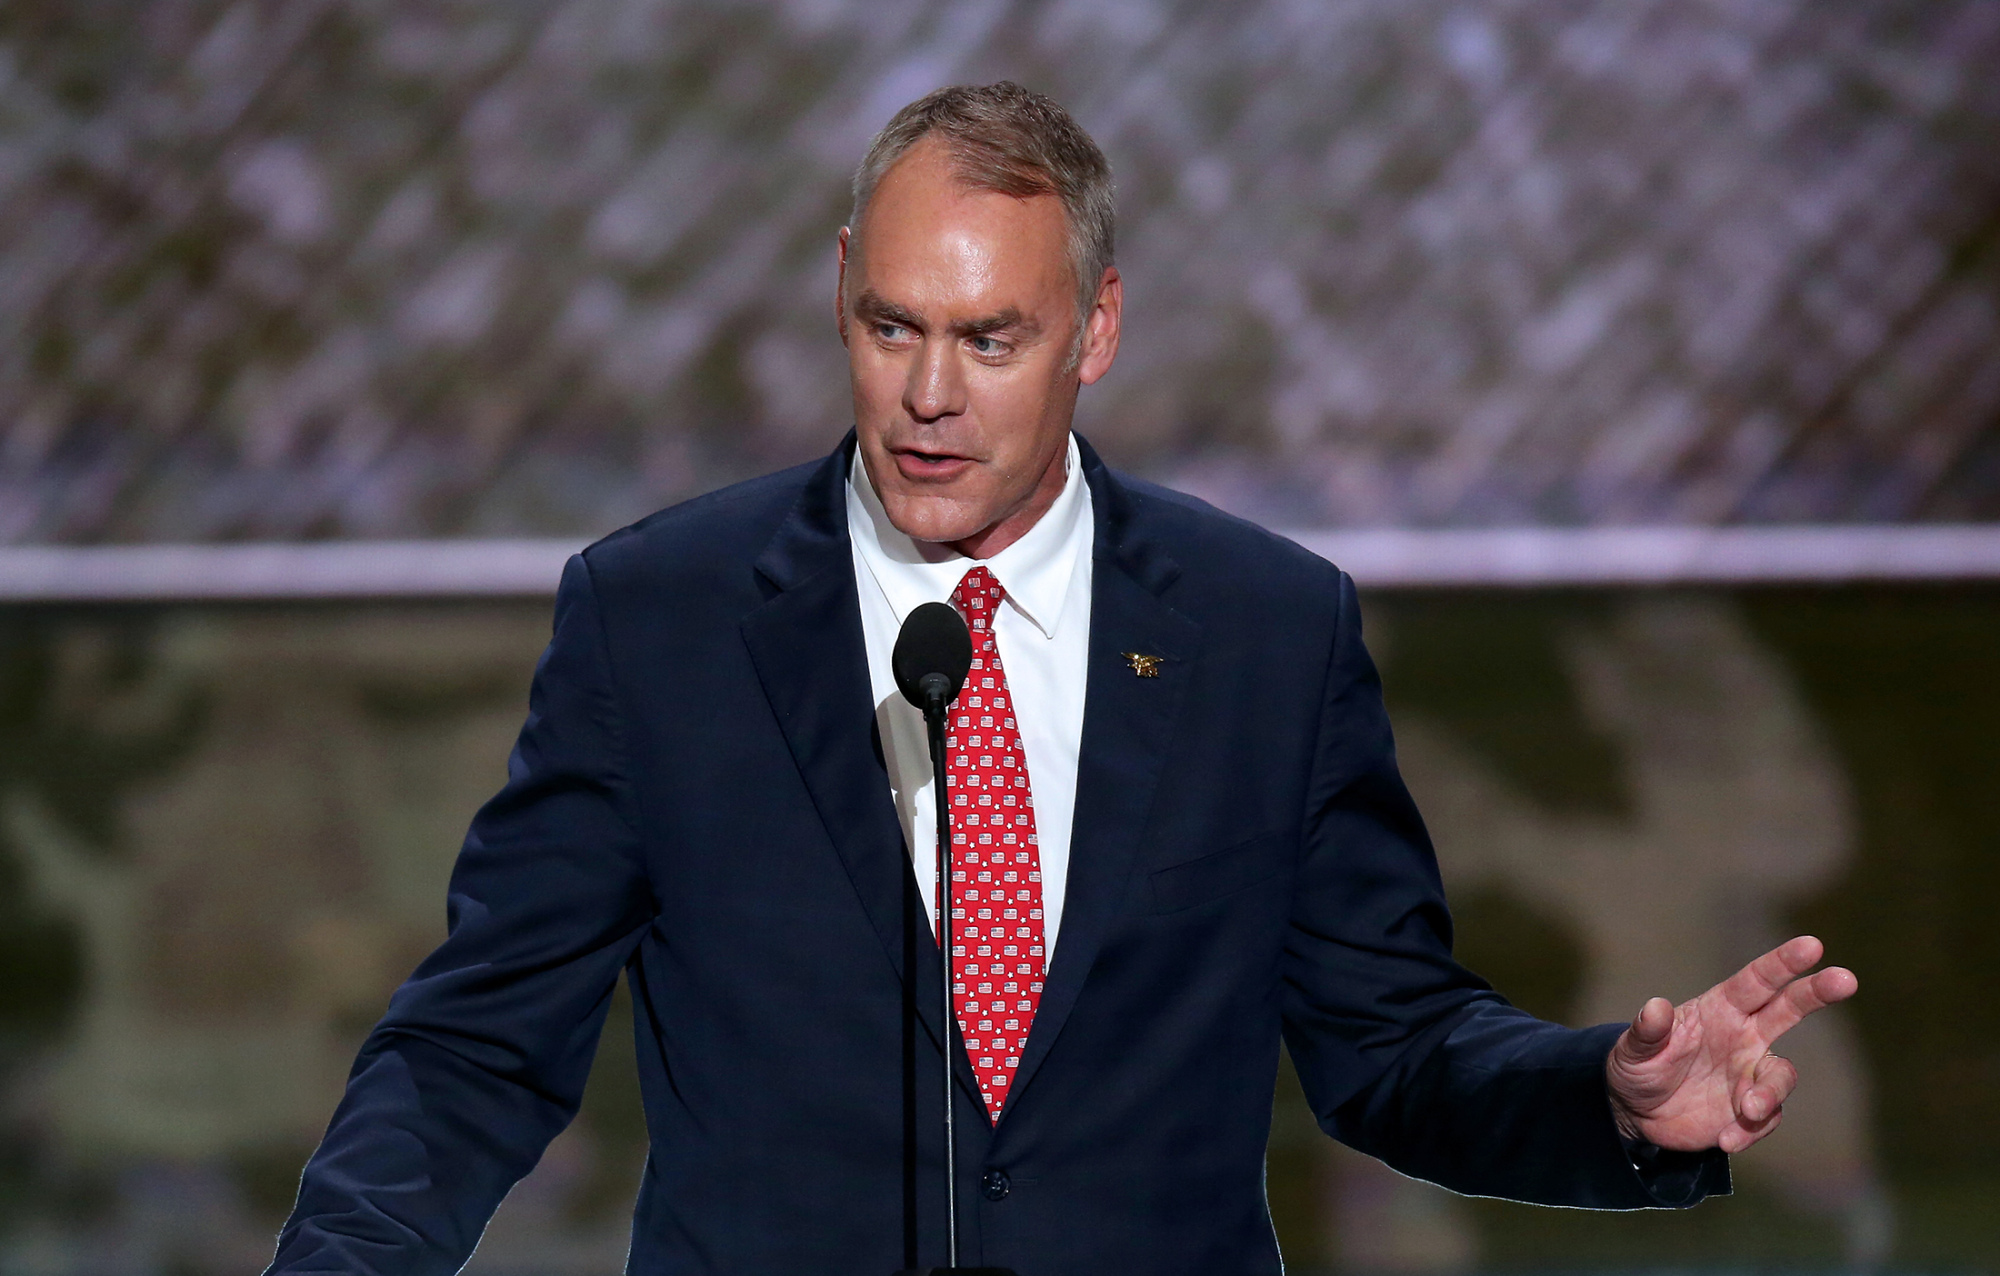 Trump Turns to Hunter and Outdoorsman Zinke to Lead Interior Bloomberg